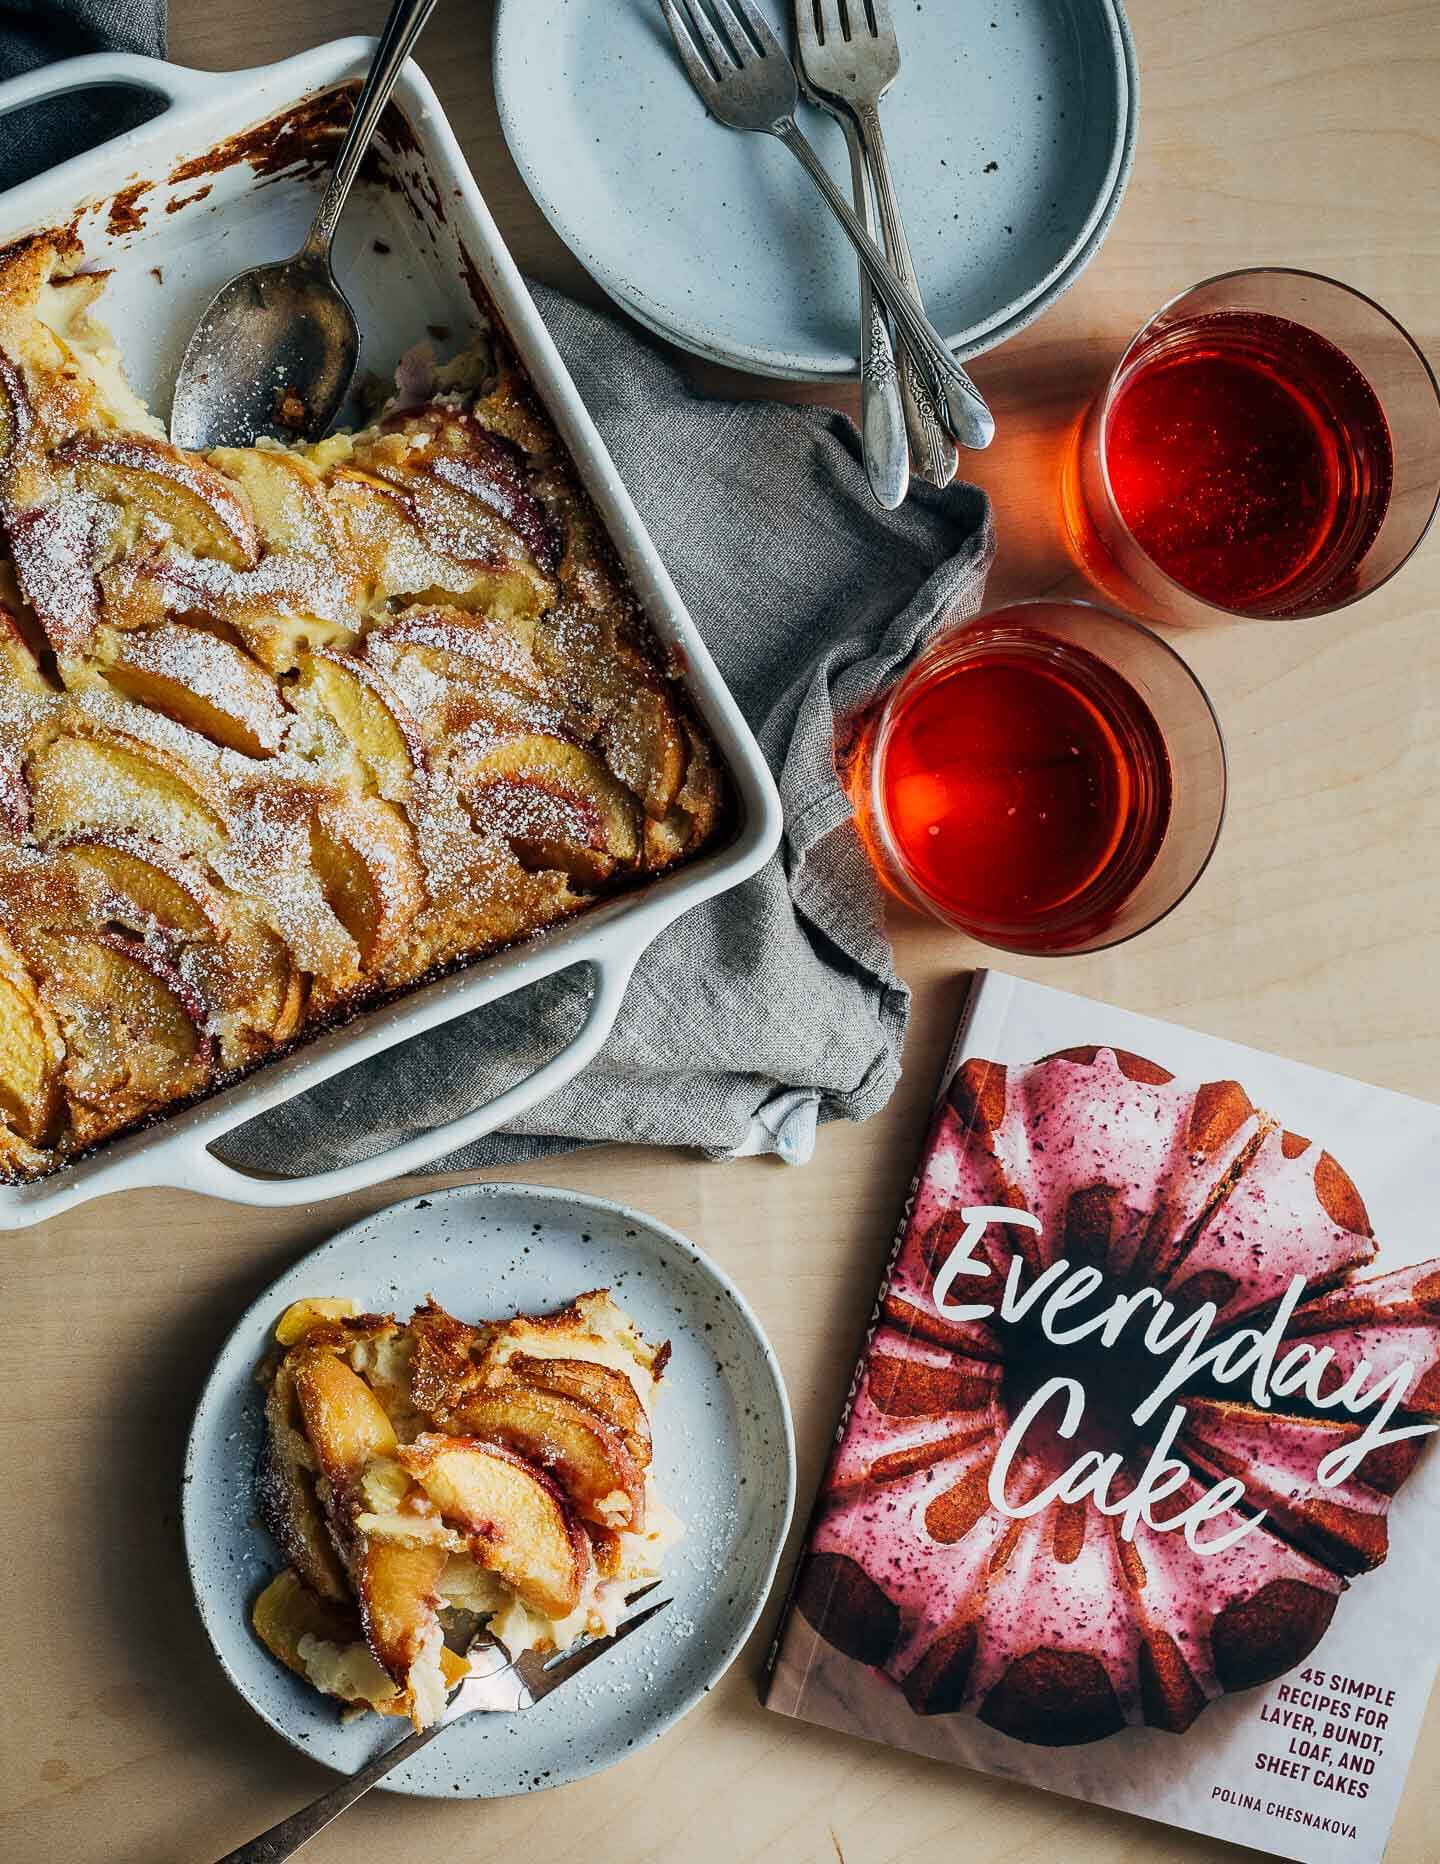 A scene with a custard cake, a slice of cake, plates, forks, cider in glasses, and a copy of the 'Everyday Cake' cookbook. 